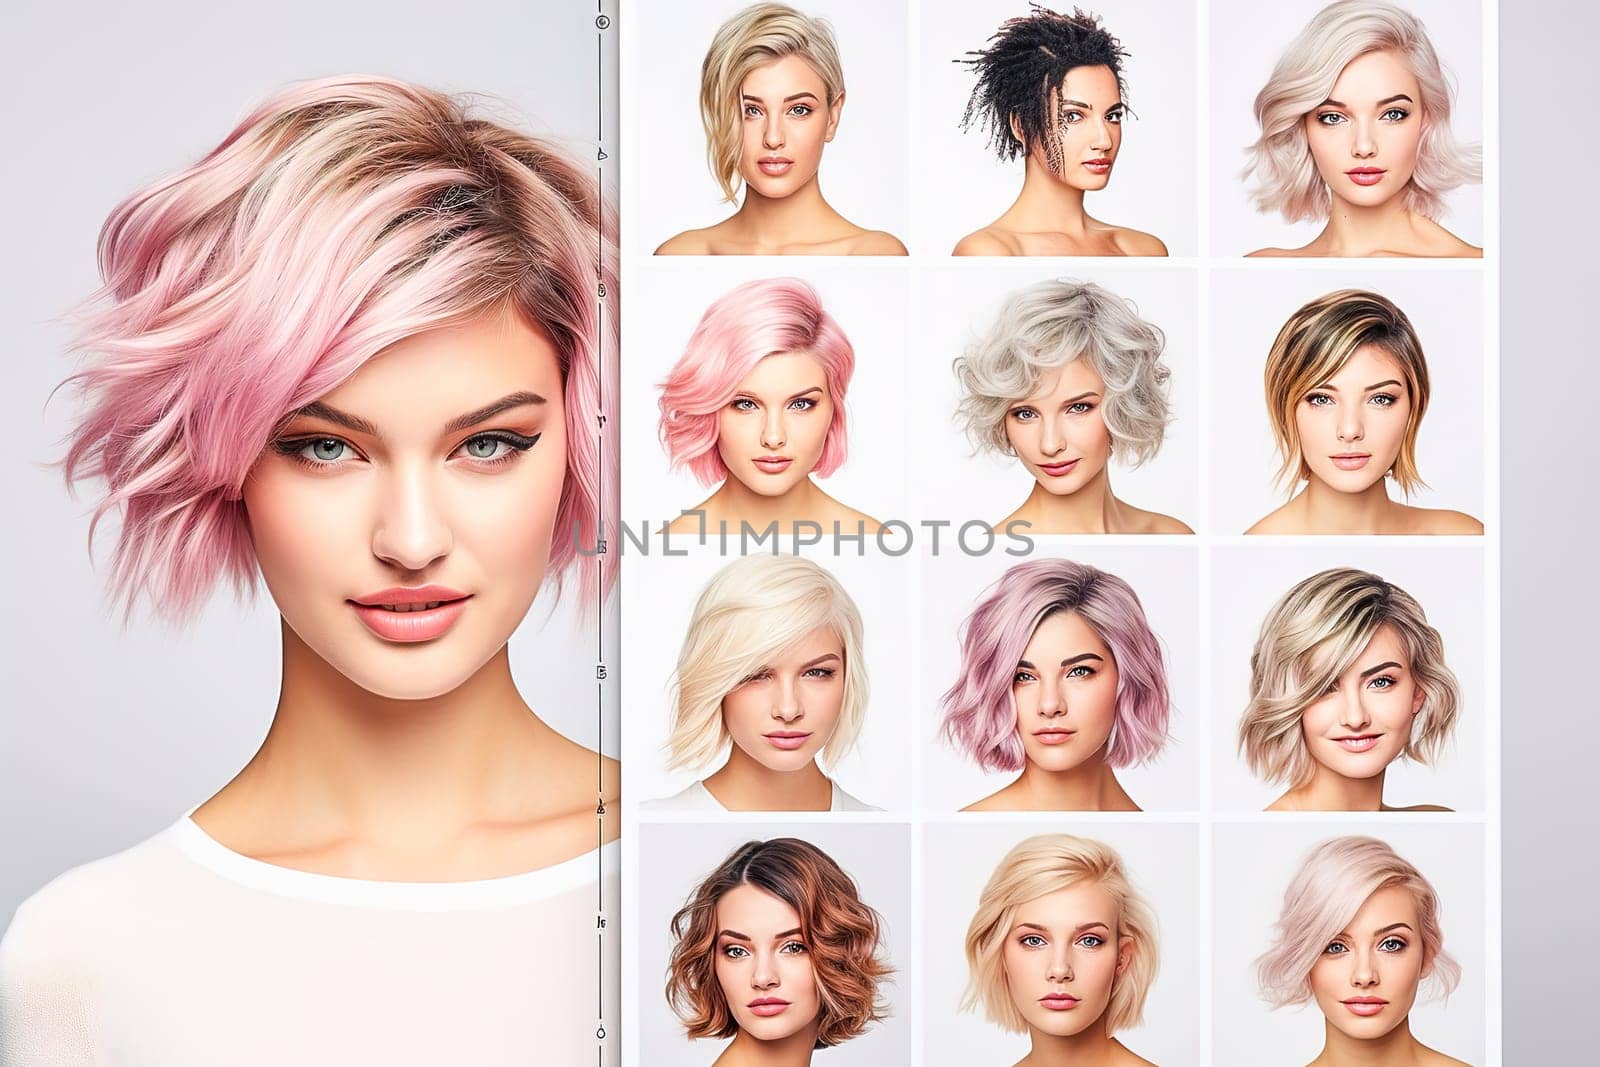 Catalog with examples of women's haircuts and coloring. by Yurich32